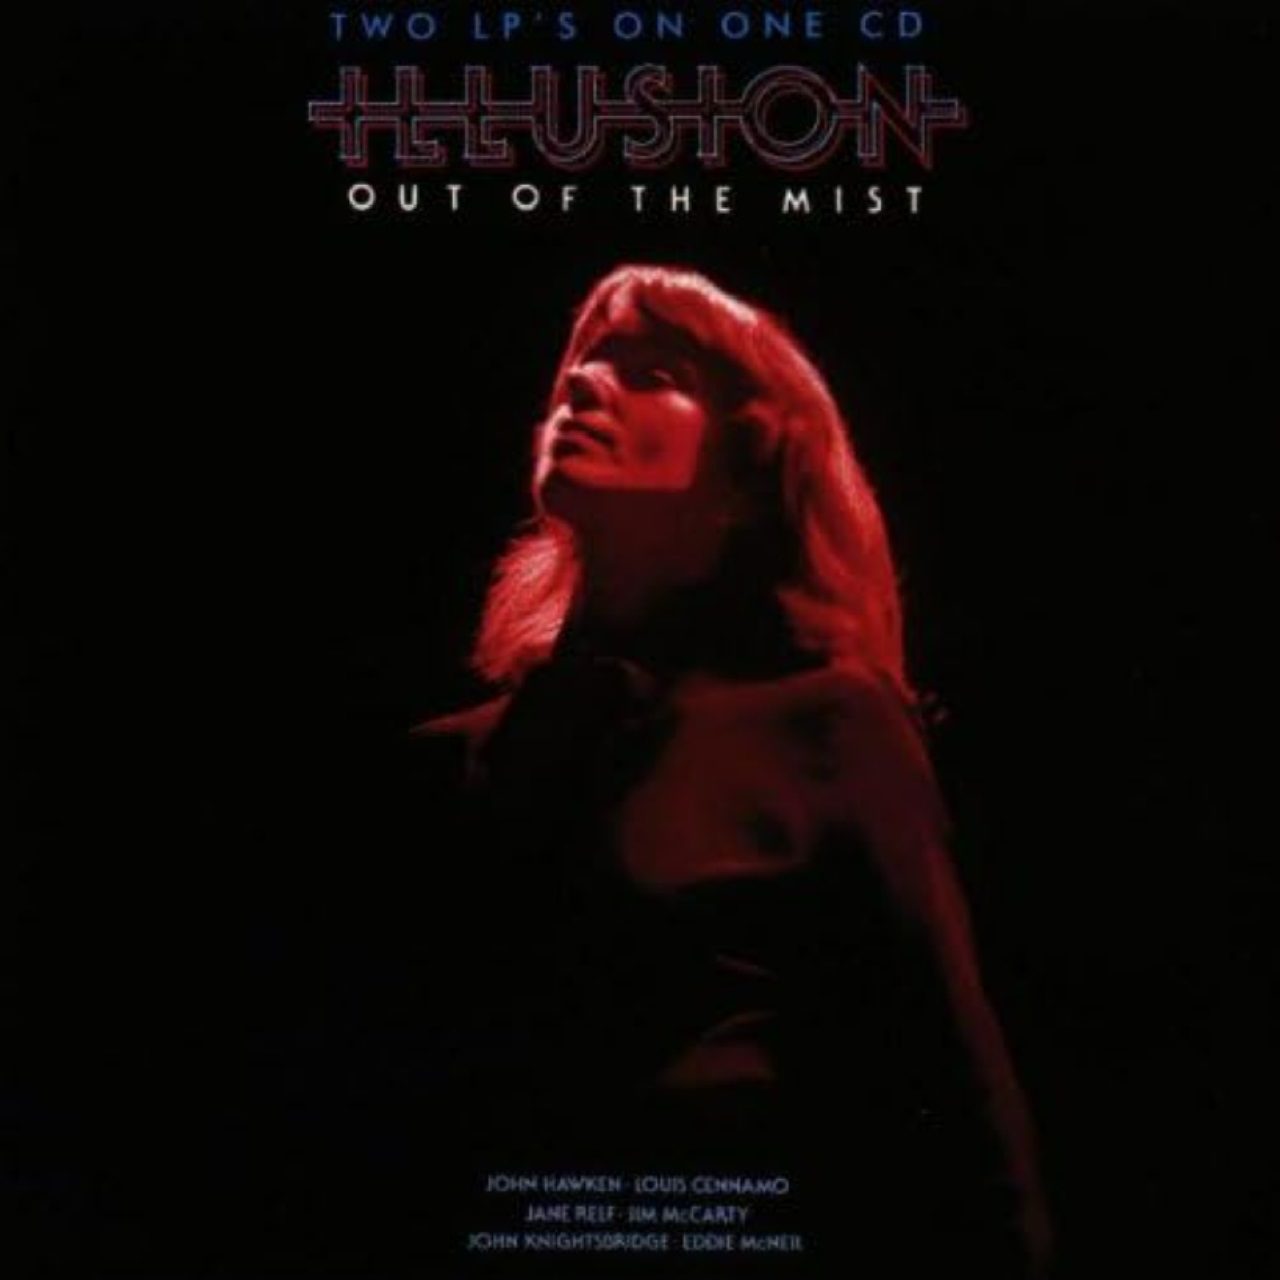 Illusion – Out Of The Mist + Illusion cover album